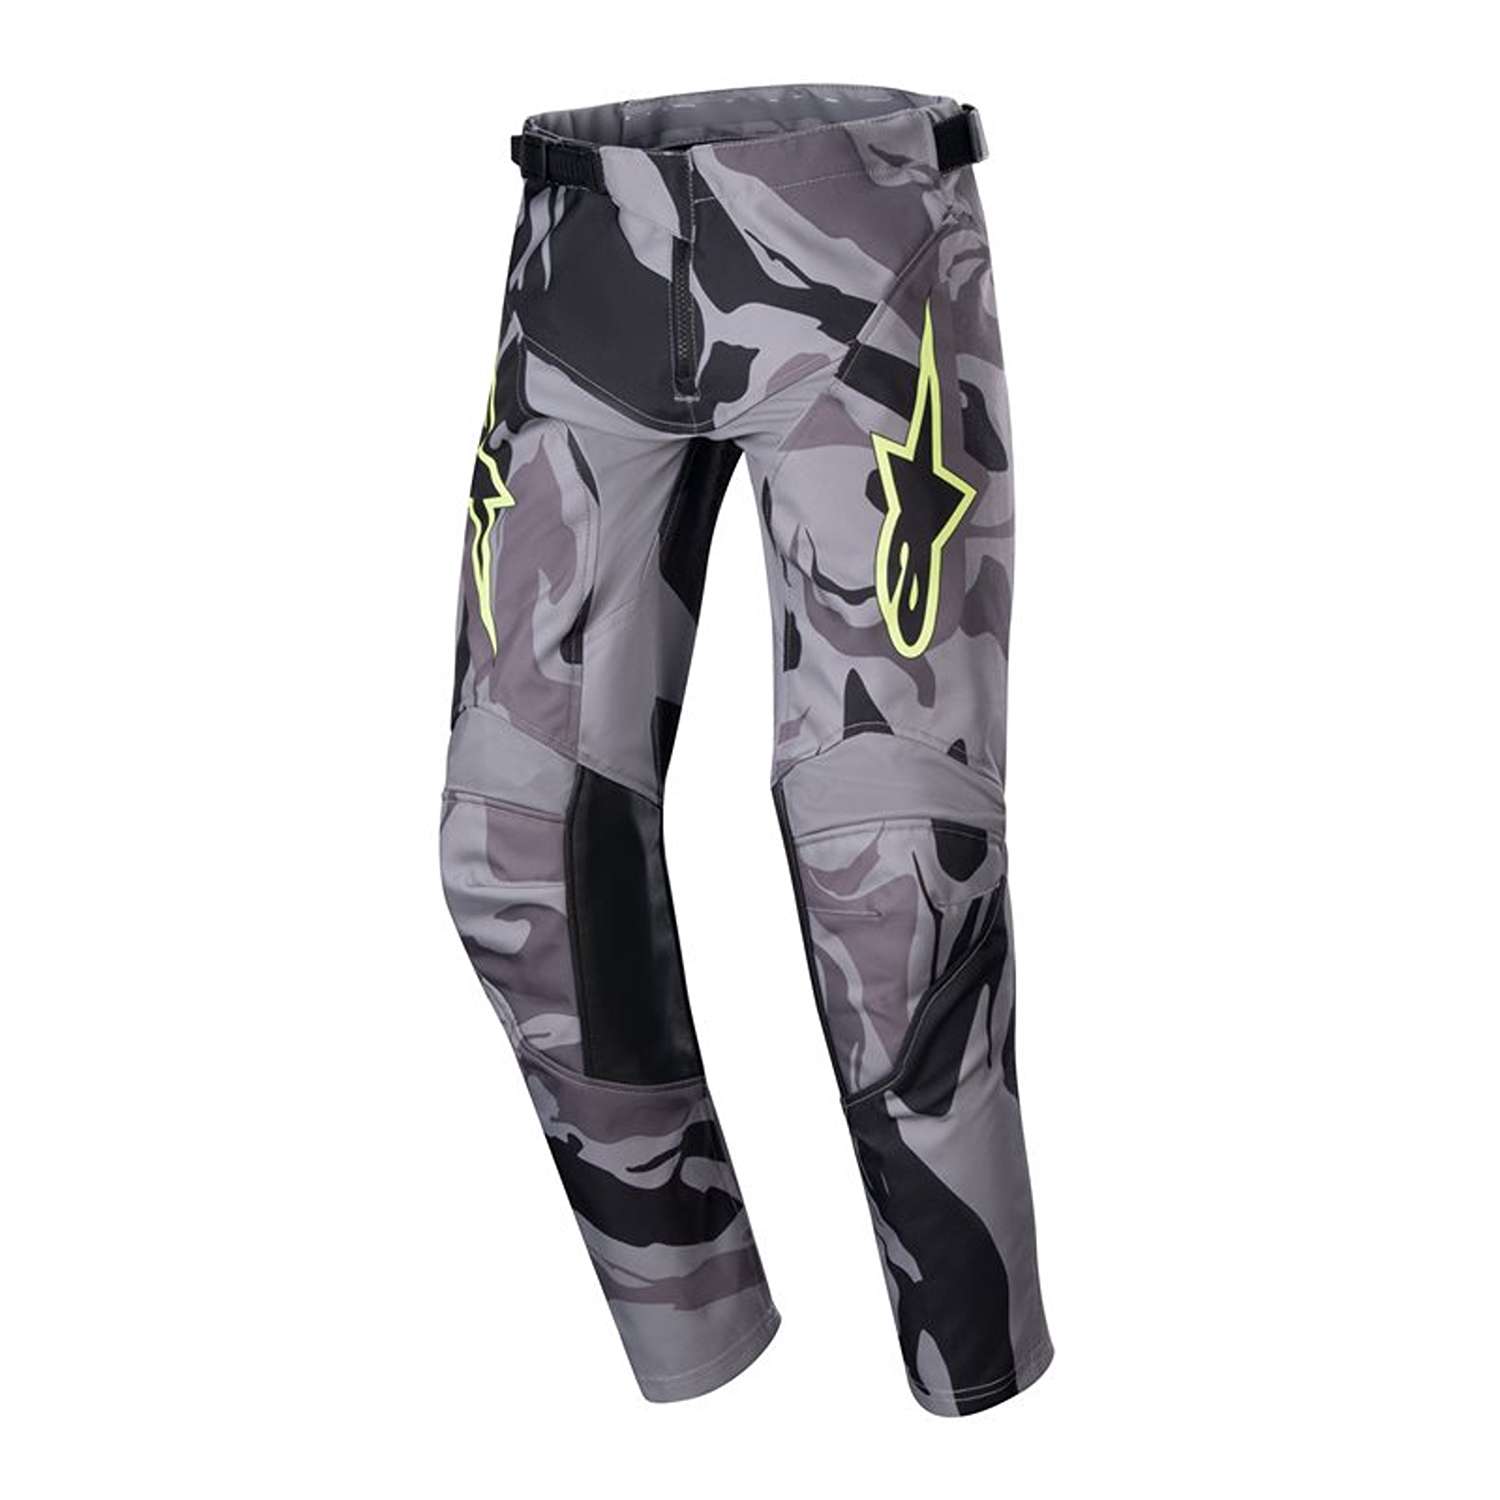 Image of Alpinestars Youth Racer Tactical Pants Cast Gray Camo Magnet Taille 26